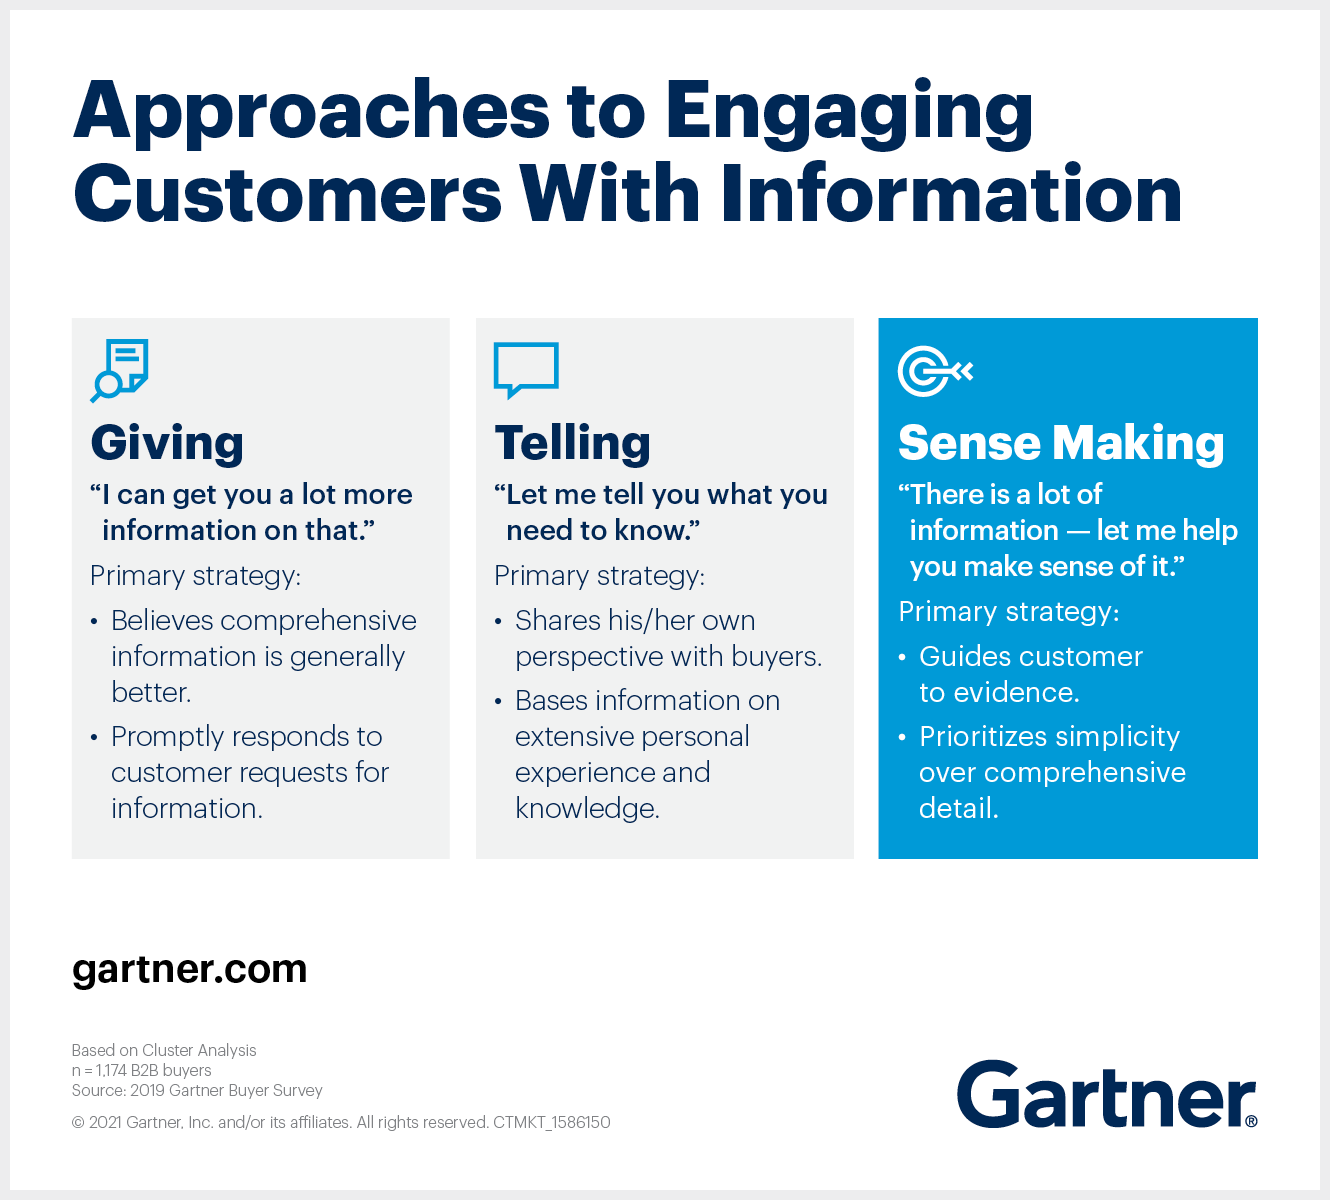 Approaches to engaging customers with information